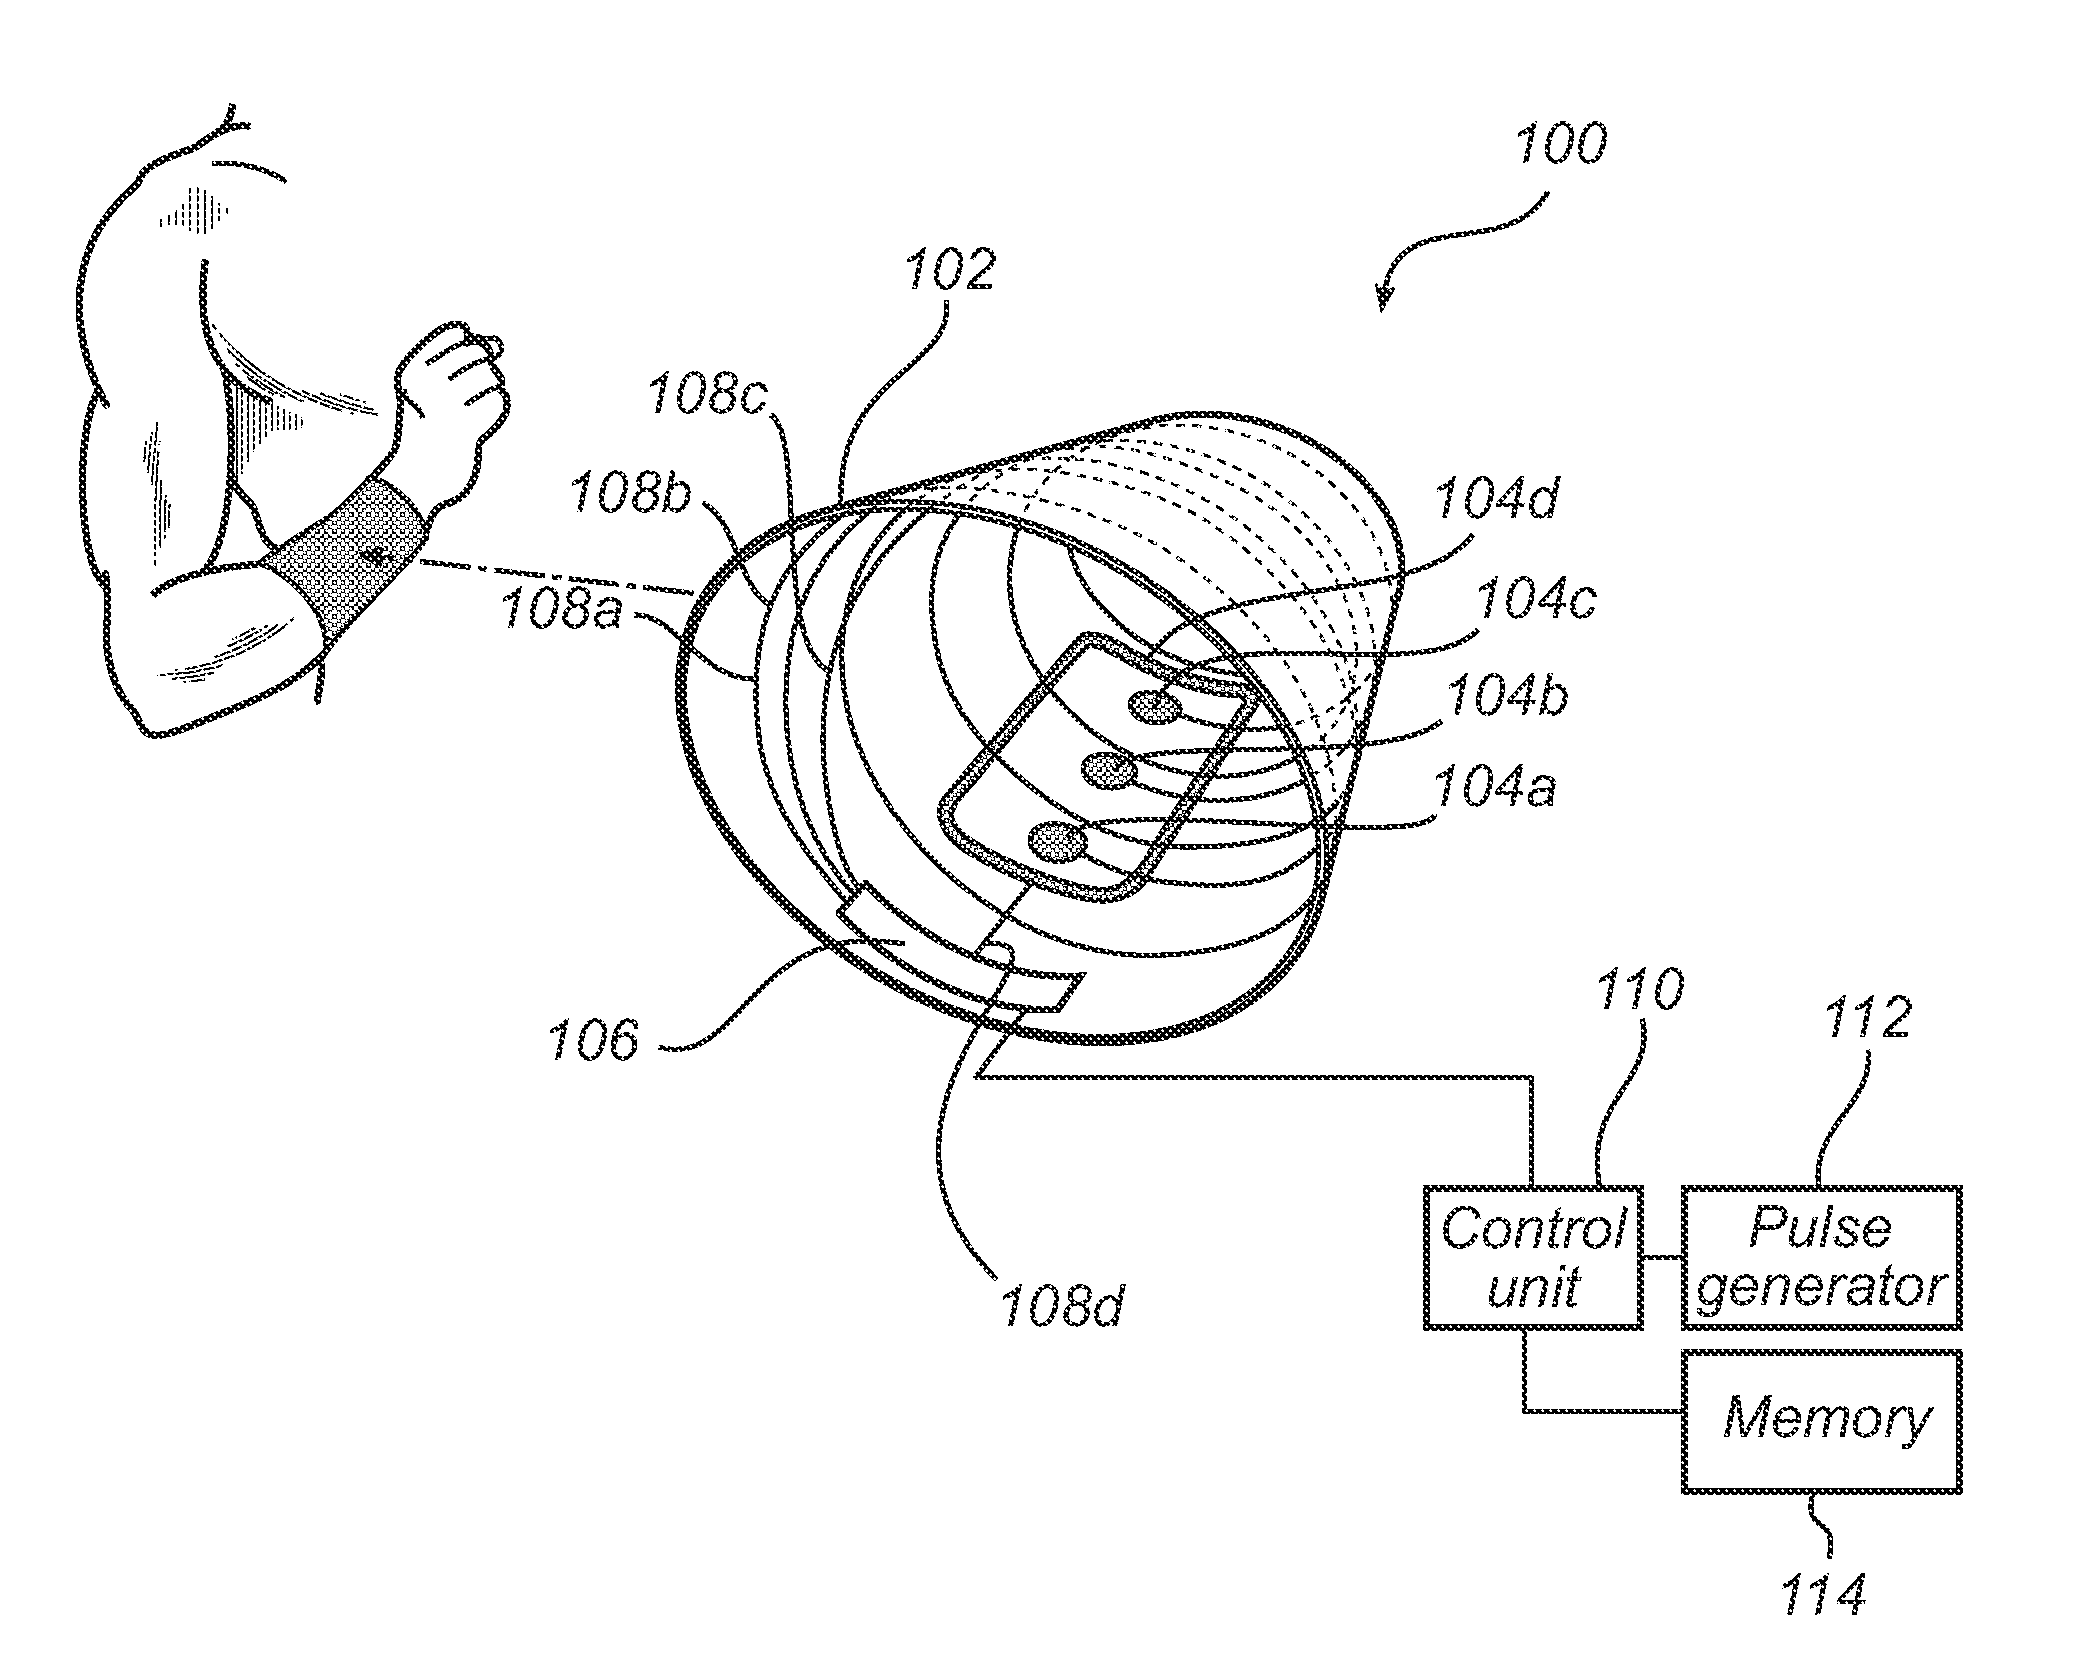 Wearable device and system for a tamper free electric stimulation of a body